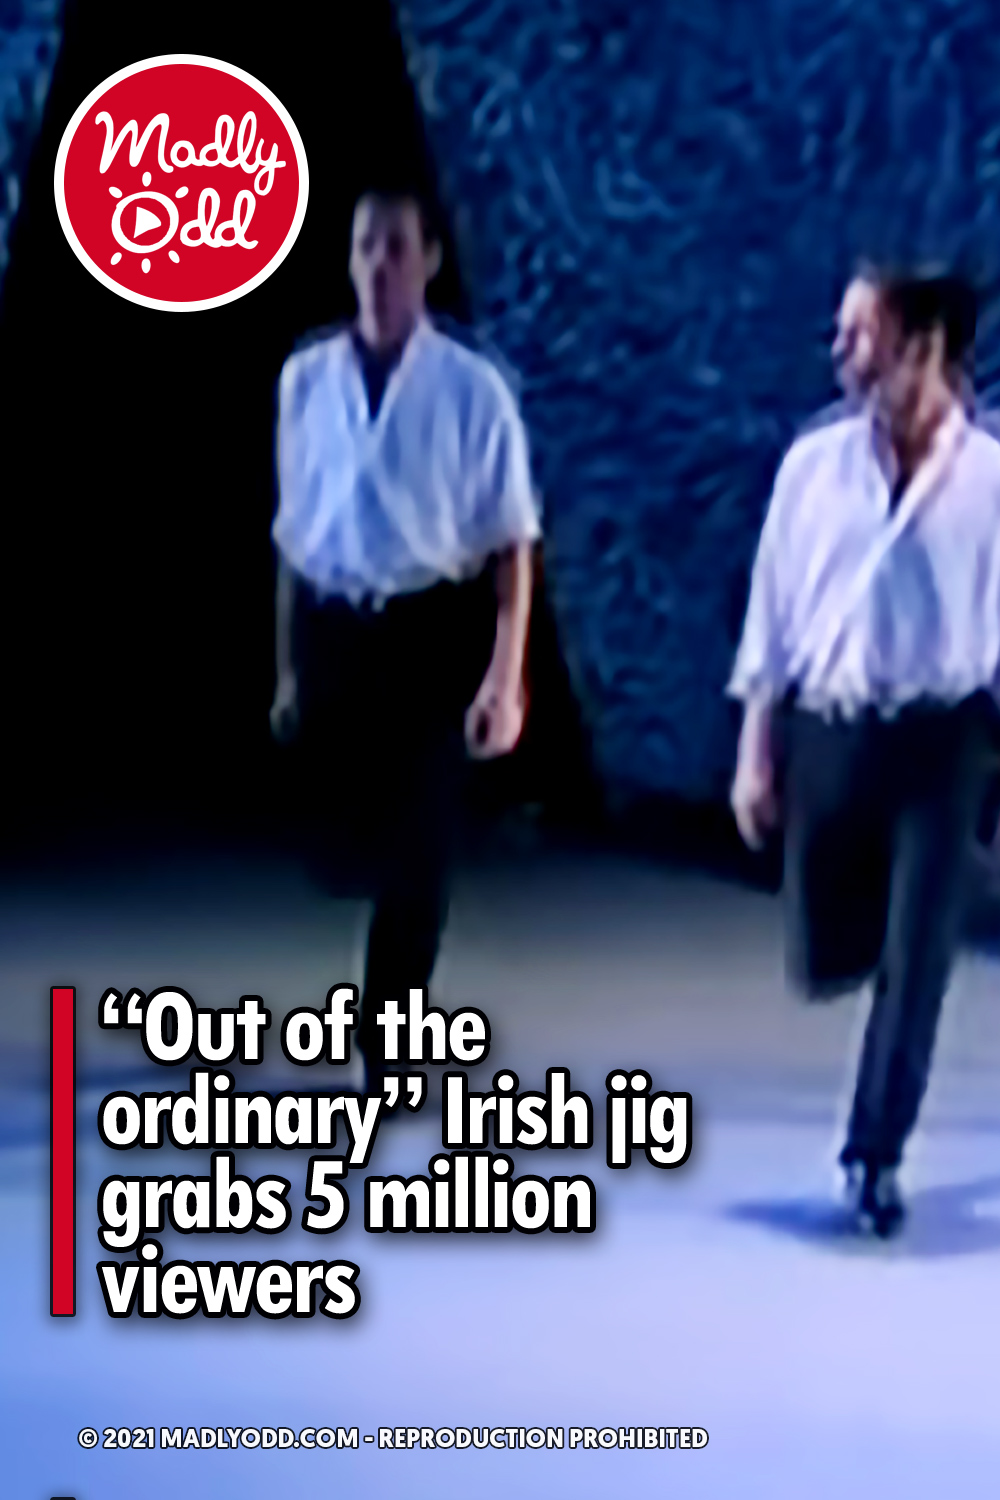 “Out of the ordinary” Irish jig grabs 5 million viewers